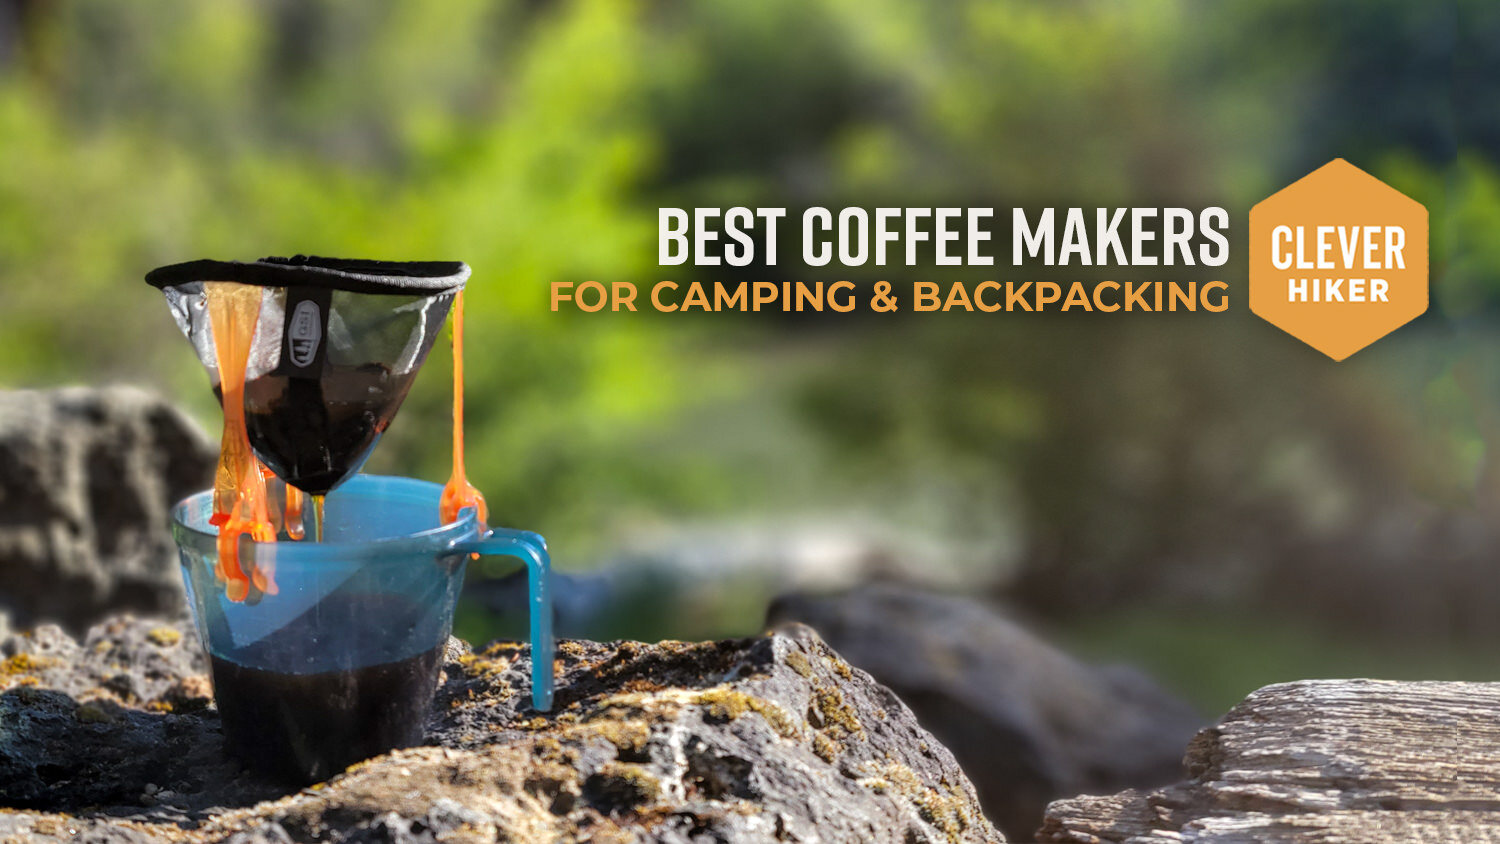 https://www.cleverhiker.com/wp-content/uploads/2023/08/Best-Coffee-Makers-for-Camping-and-Backpacking.jpeg